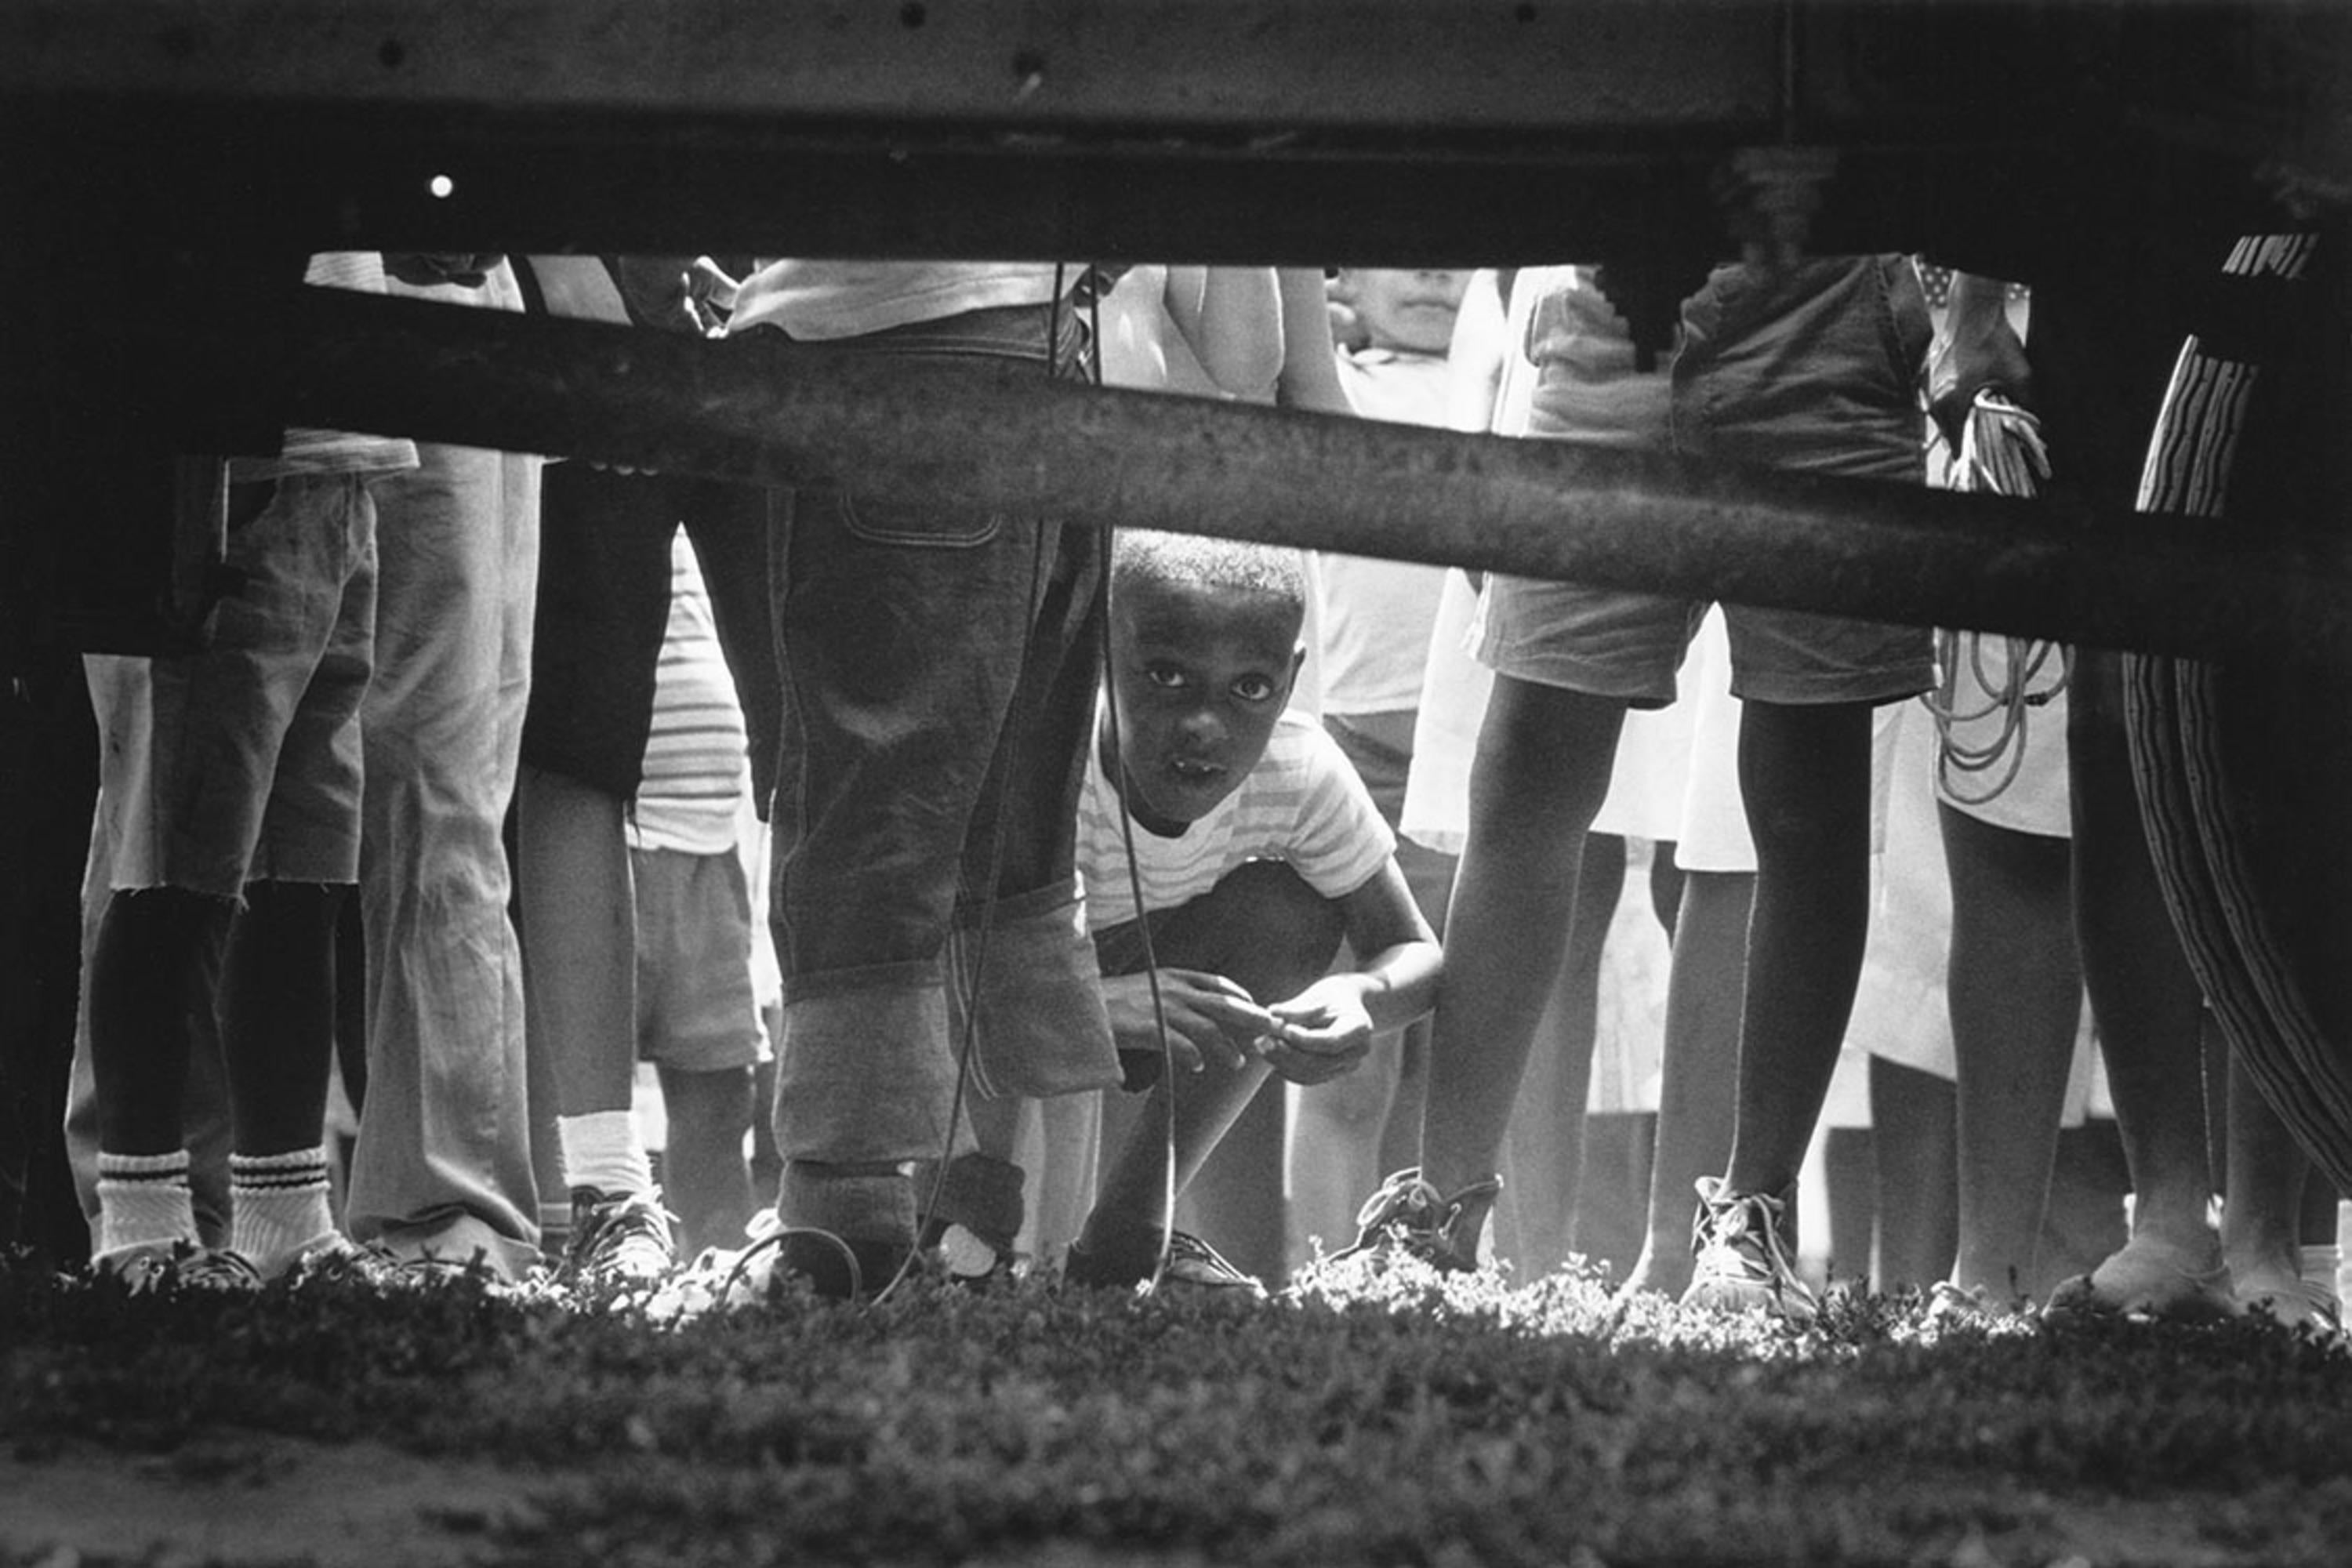 Title: Illinois Rally for Civil Rights’ at Soldier Field, Chicago

Estate-stamped, gelatin-print silver

Crowds at the ‘Illinois Rally for Civil Rights’ at Soldier Field in Chicago, IL, US, June 21, 1964

Available sizes: 
16”x20" Edition of